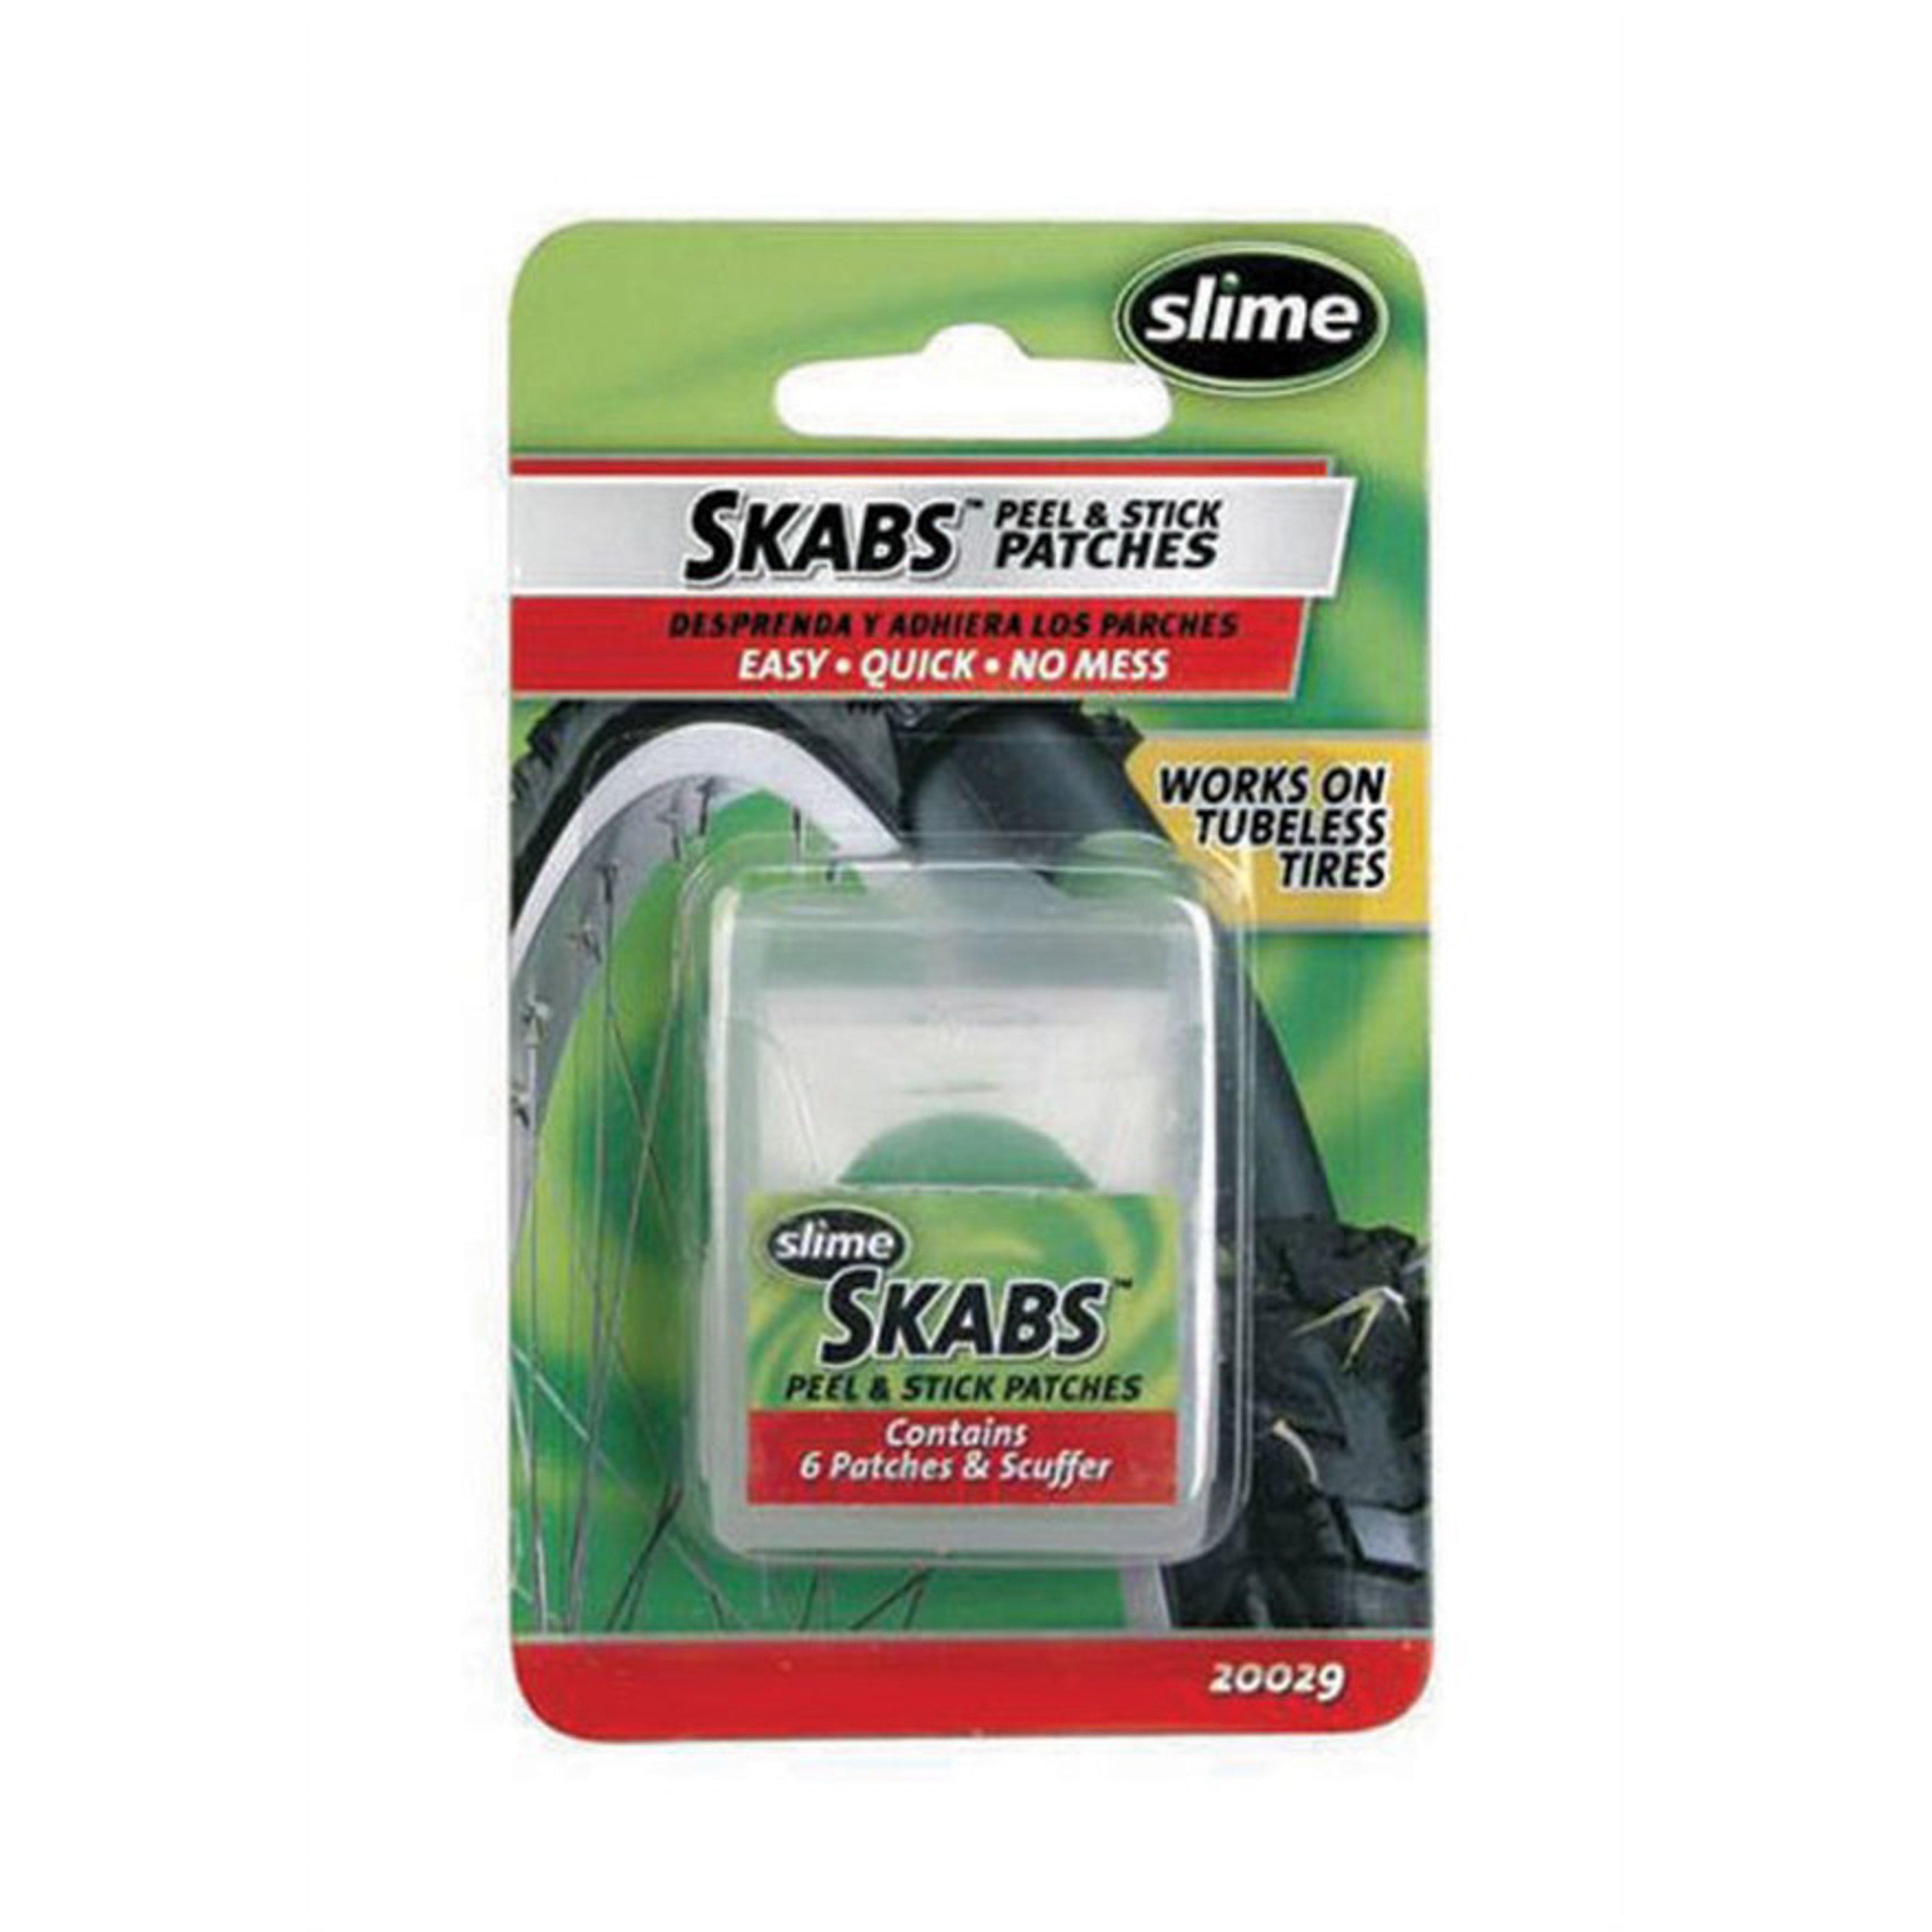 Raleigh Skabs Self Adhesive Patches Review